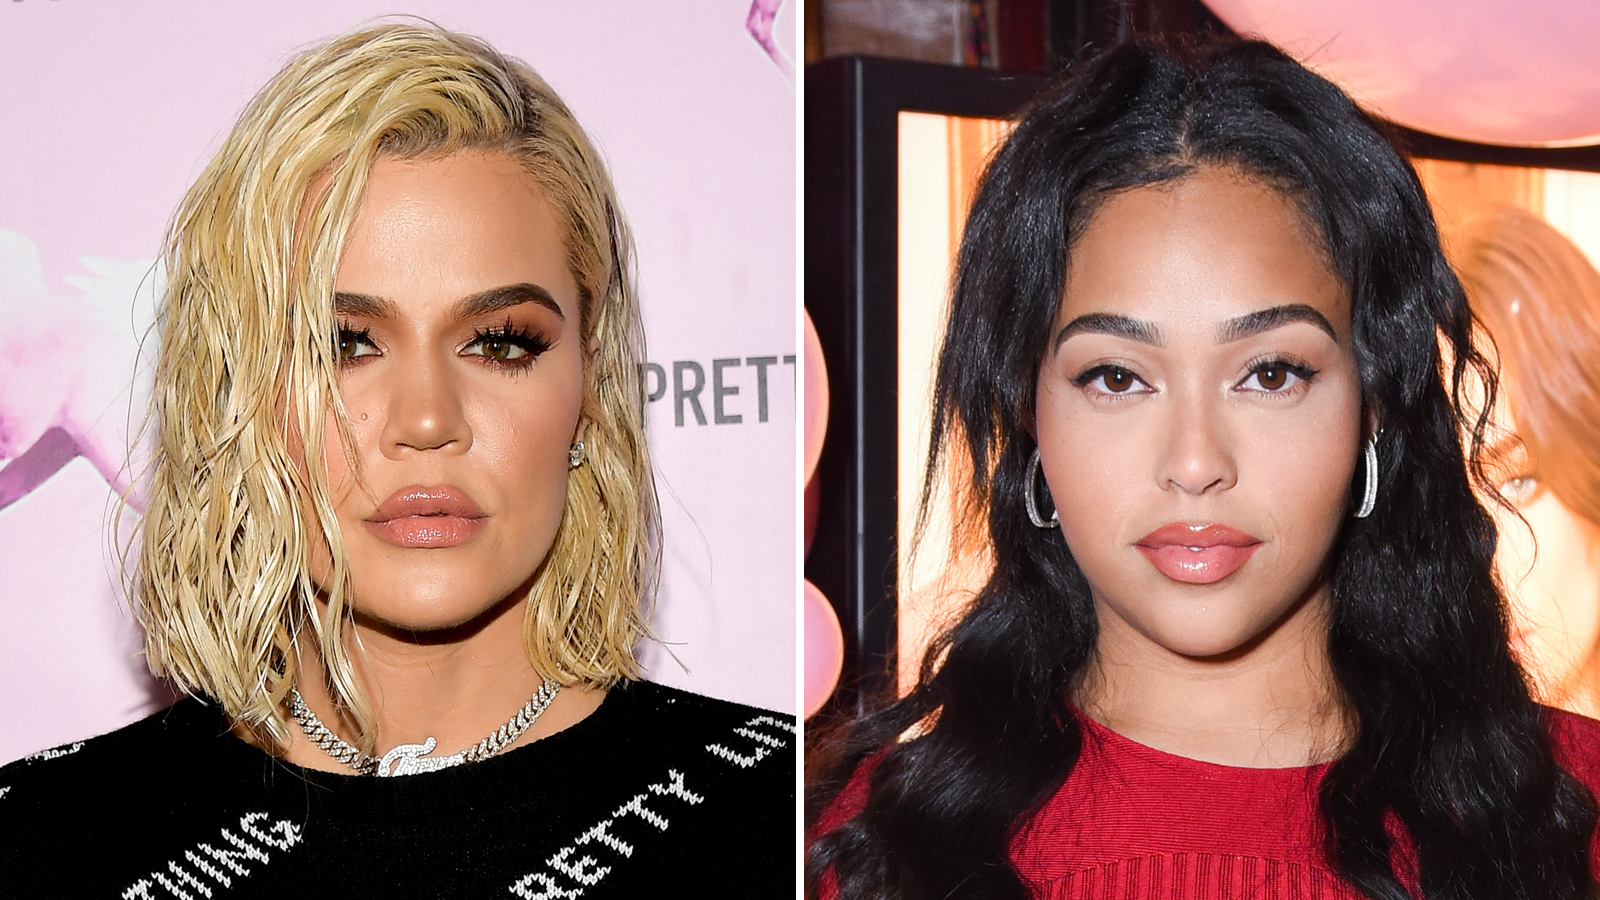 Jordyn Woods: Who is Kylie Jenner's BFF (and Khloe's Home-Wrecker